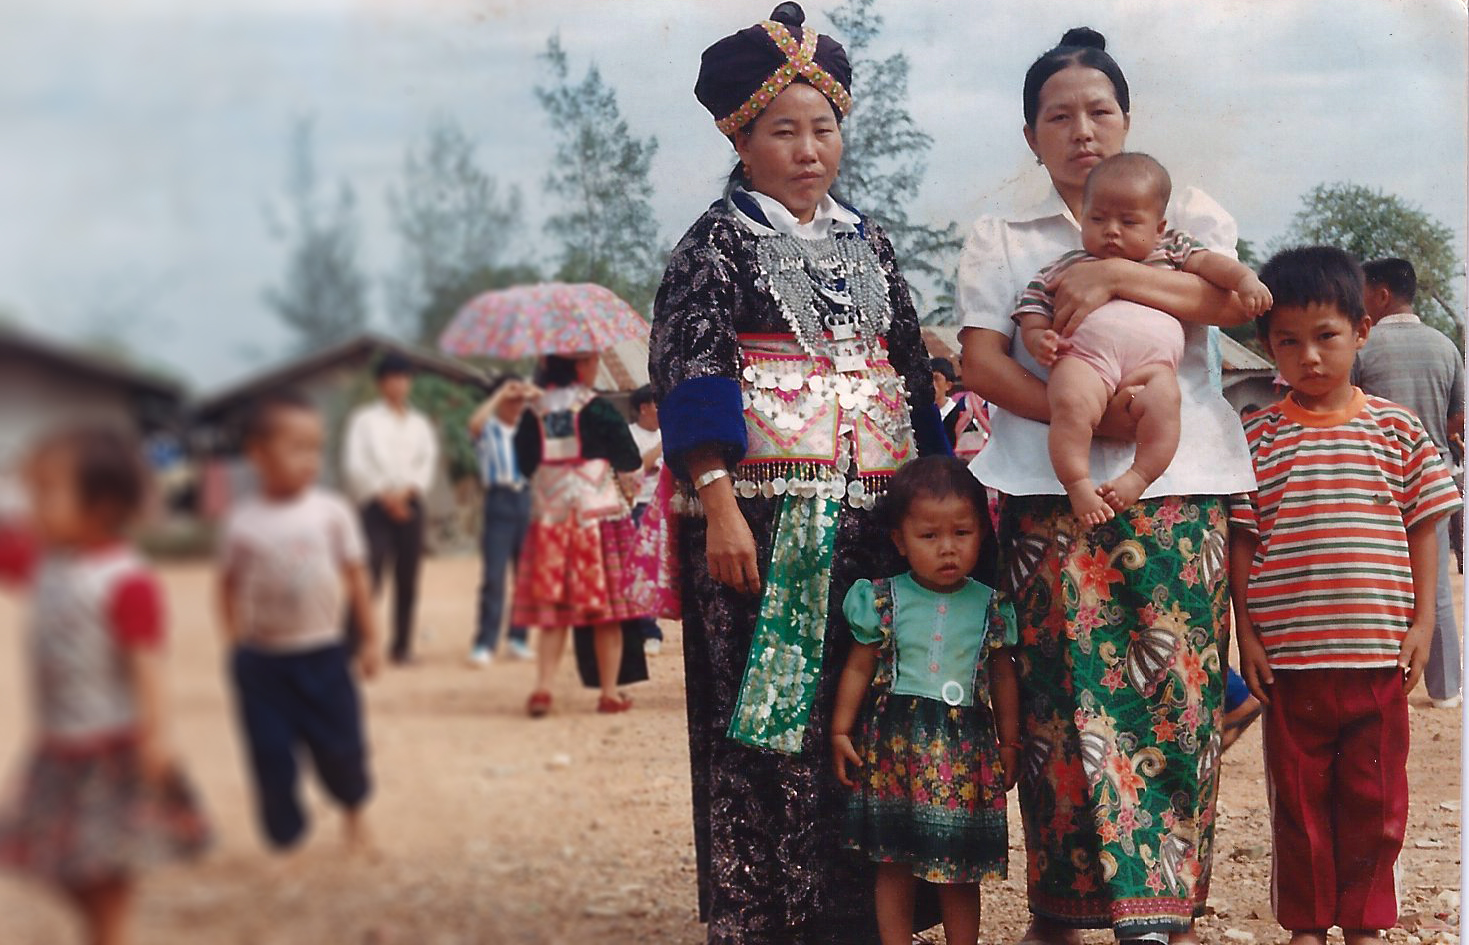 Two Hmong women in traditional clothing pose with two children and a baby. Trees, buildings, and people are seen in the background